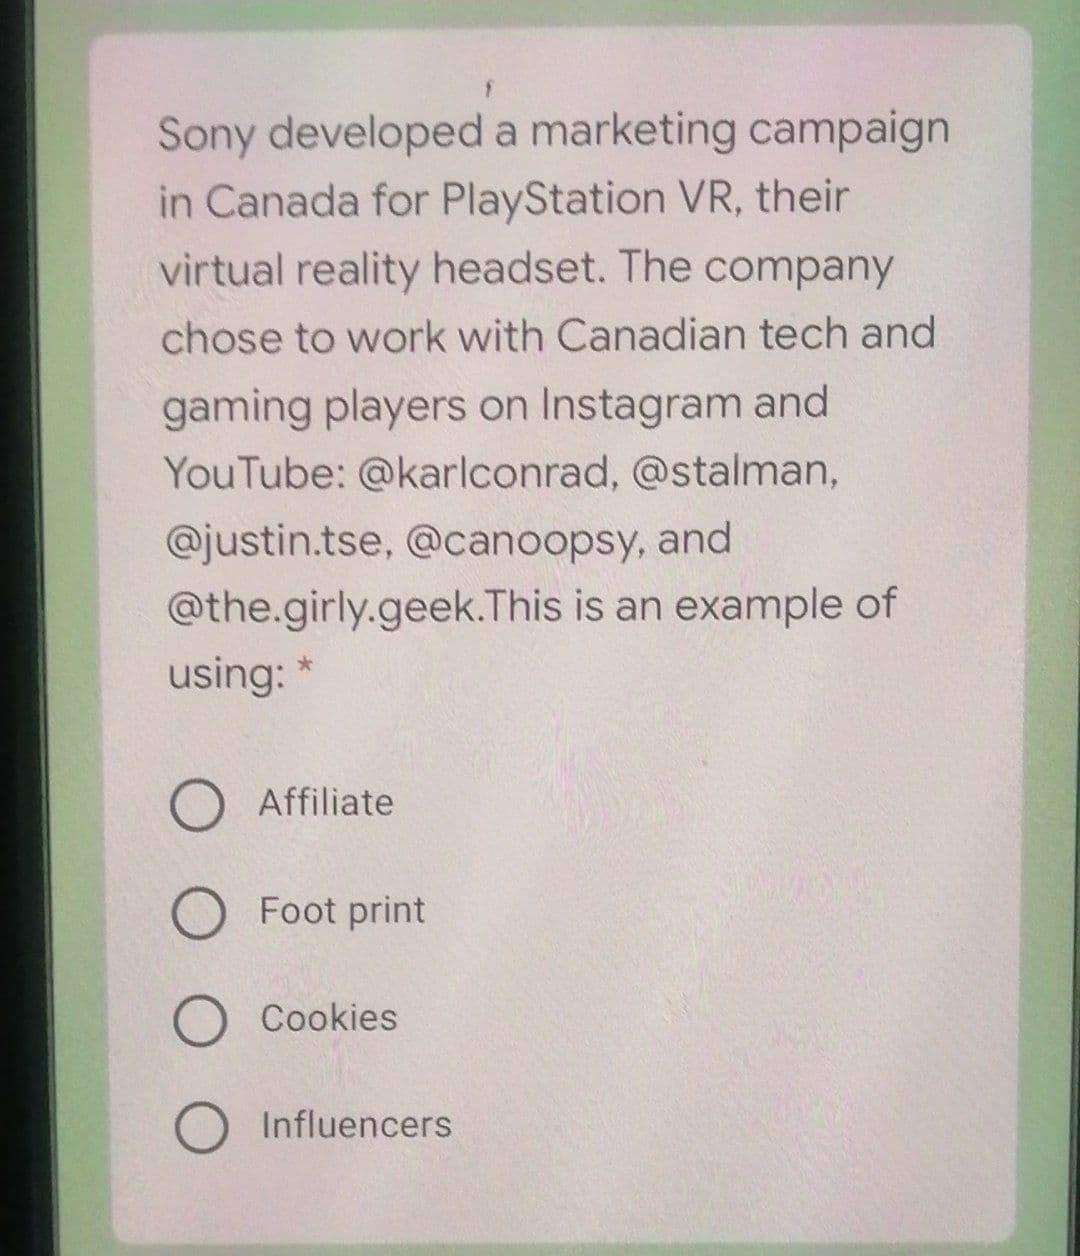 Sony developed a marketing campaign
in Canada for PlayStation VR, their
virtual reality headset. The company
chose to work with Canadian tech and
gaming players on Instagram and
YouTube: @karlconrad, @stalman,
@justin.tse, @canoopsy, and
@the.girly.geek.This is an example of
using:
Affiliate
O Foot print
O Cookies
O Influencers
